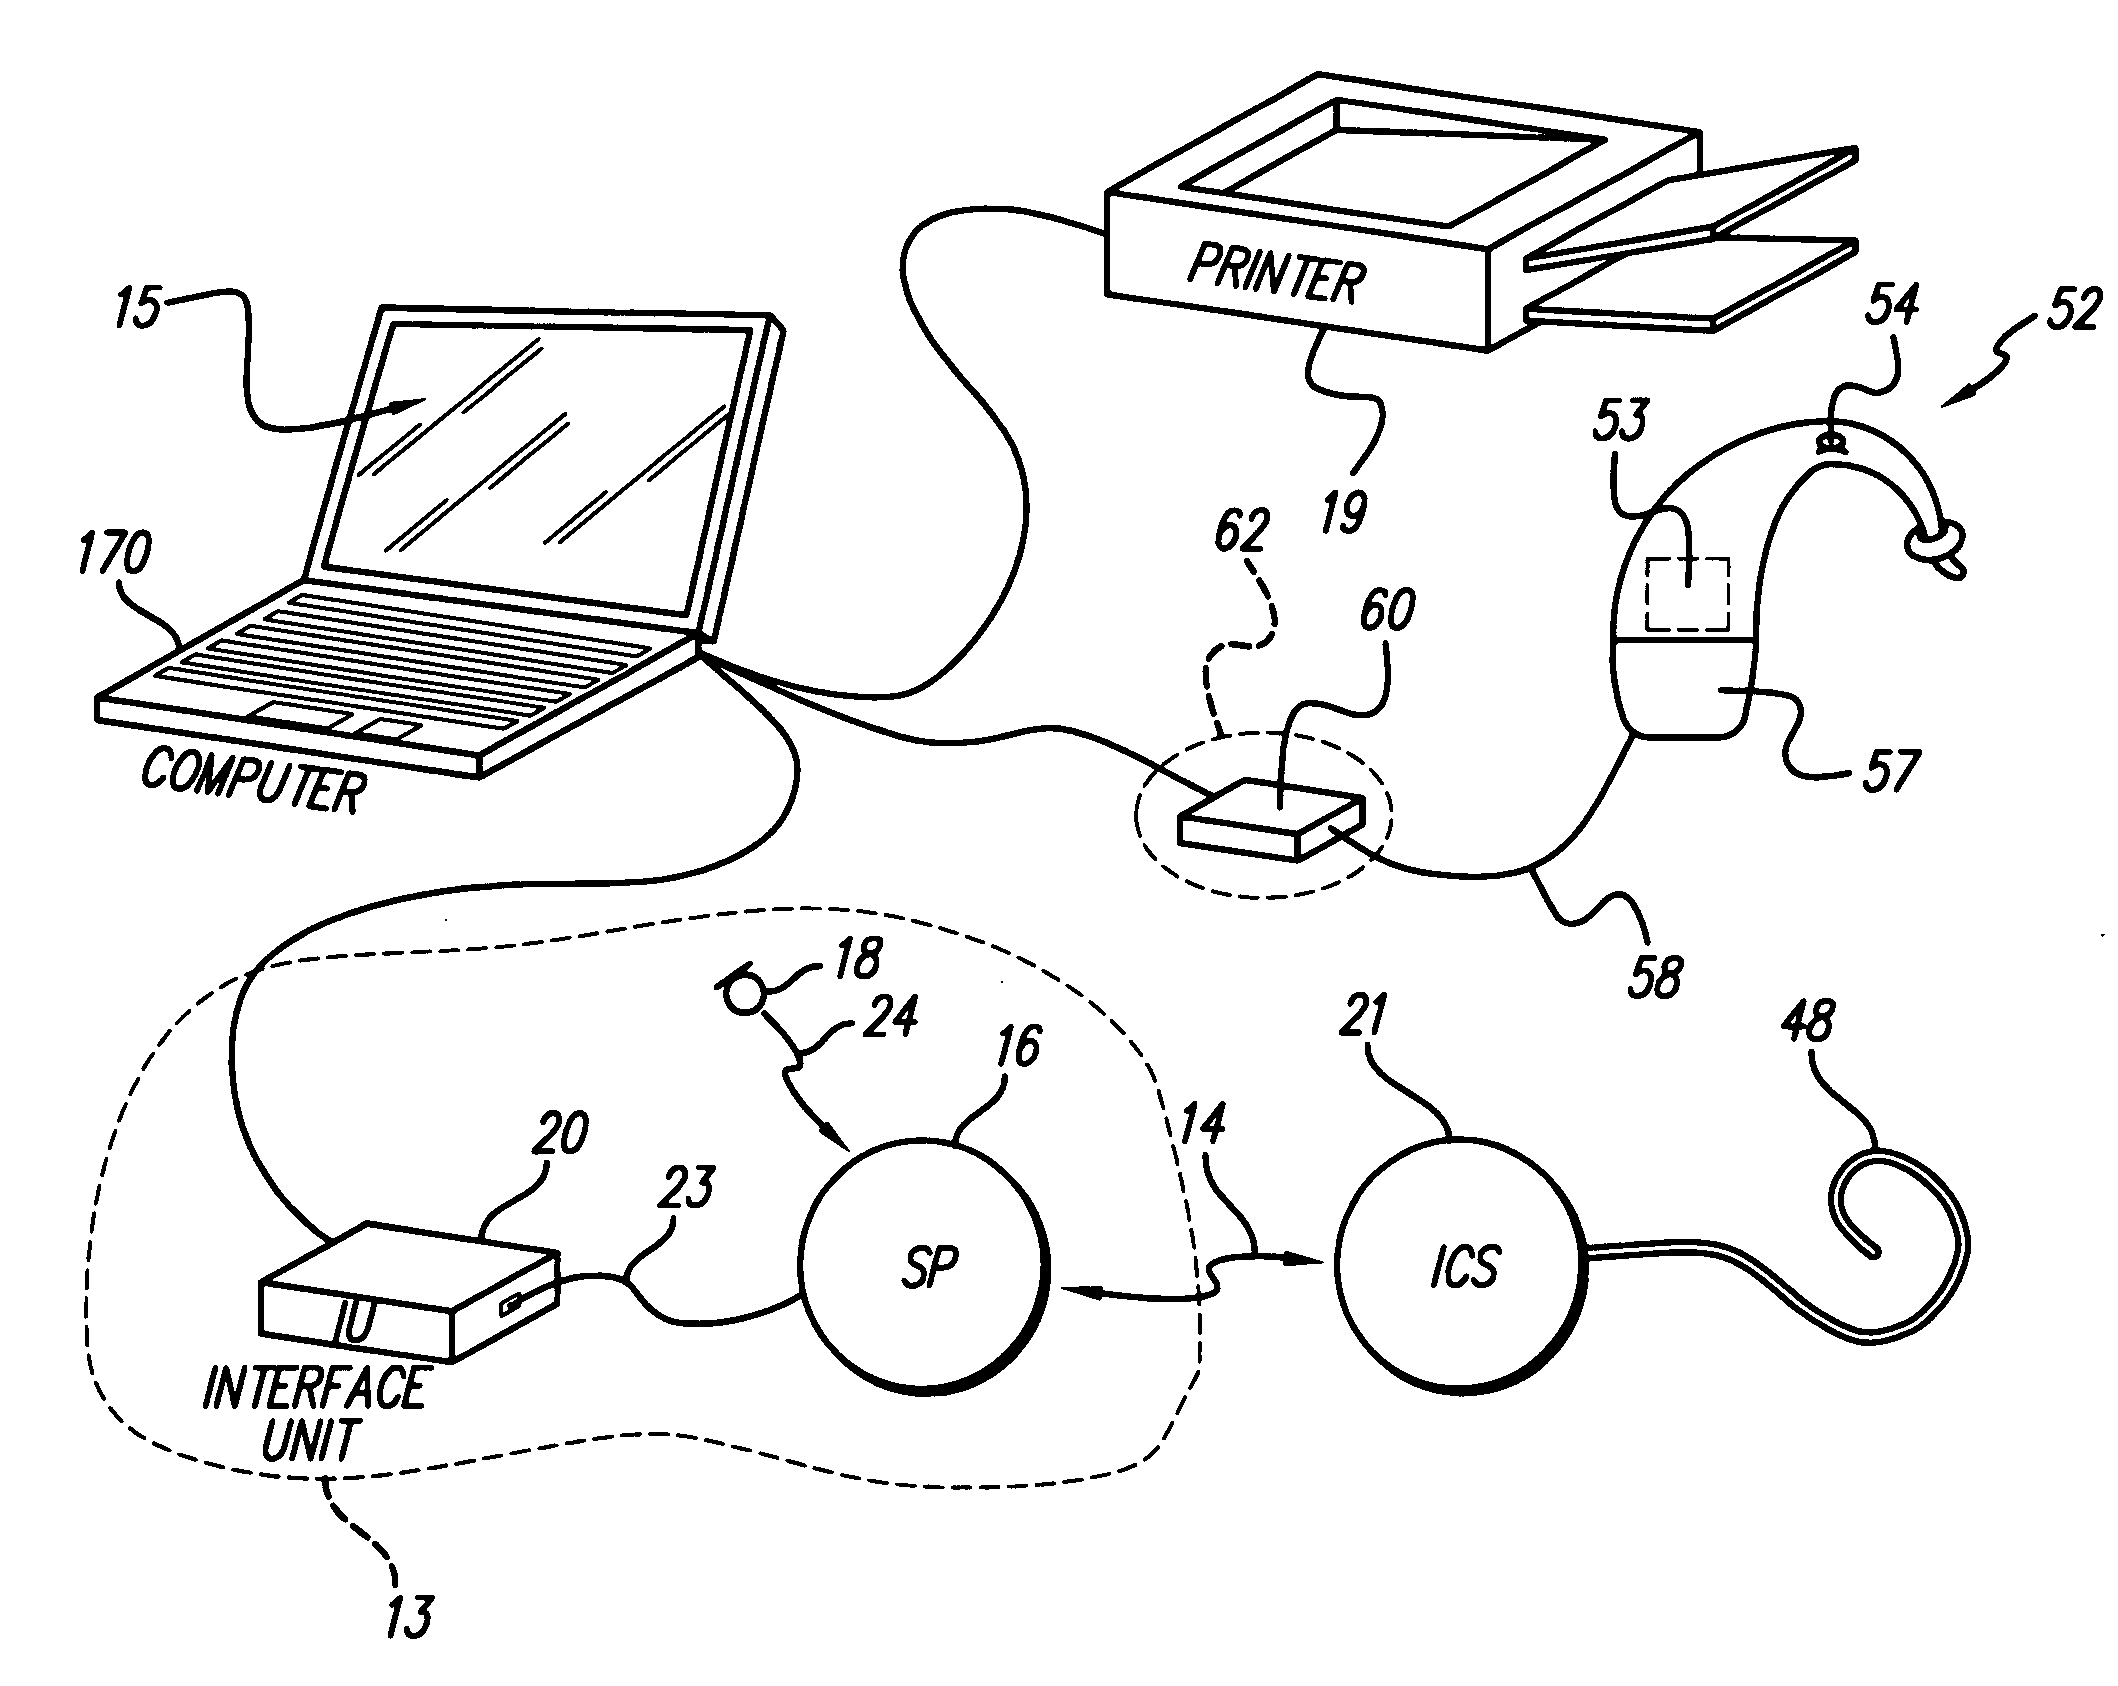 Electric and acoustic stimulation fitting systems and methods